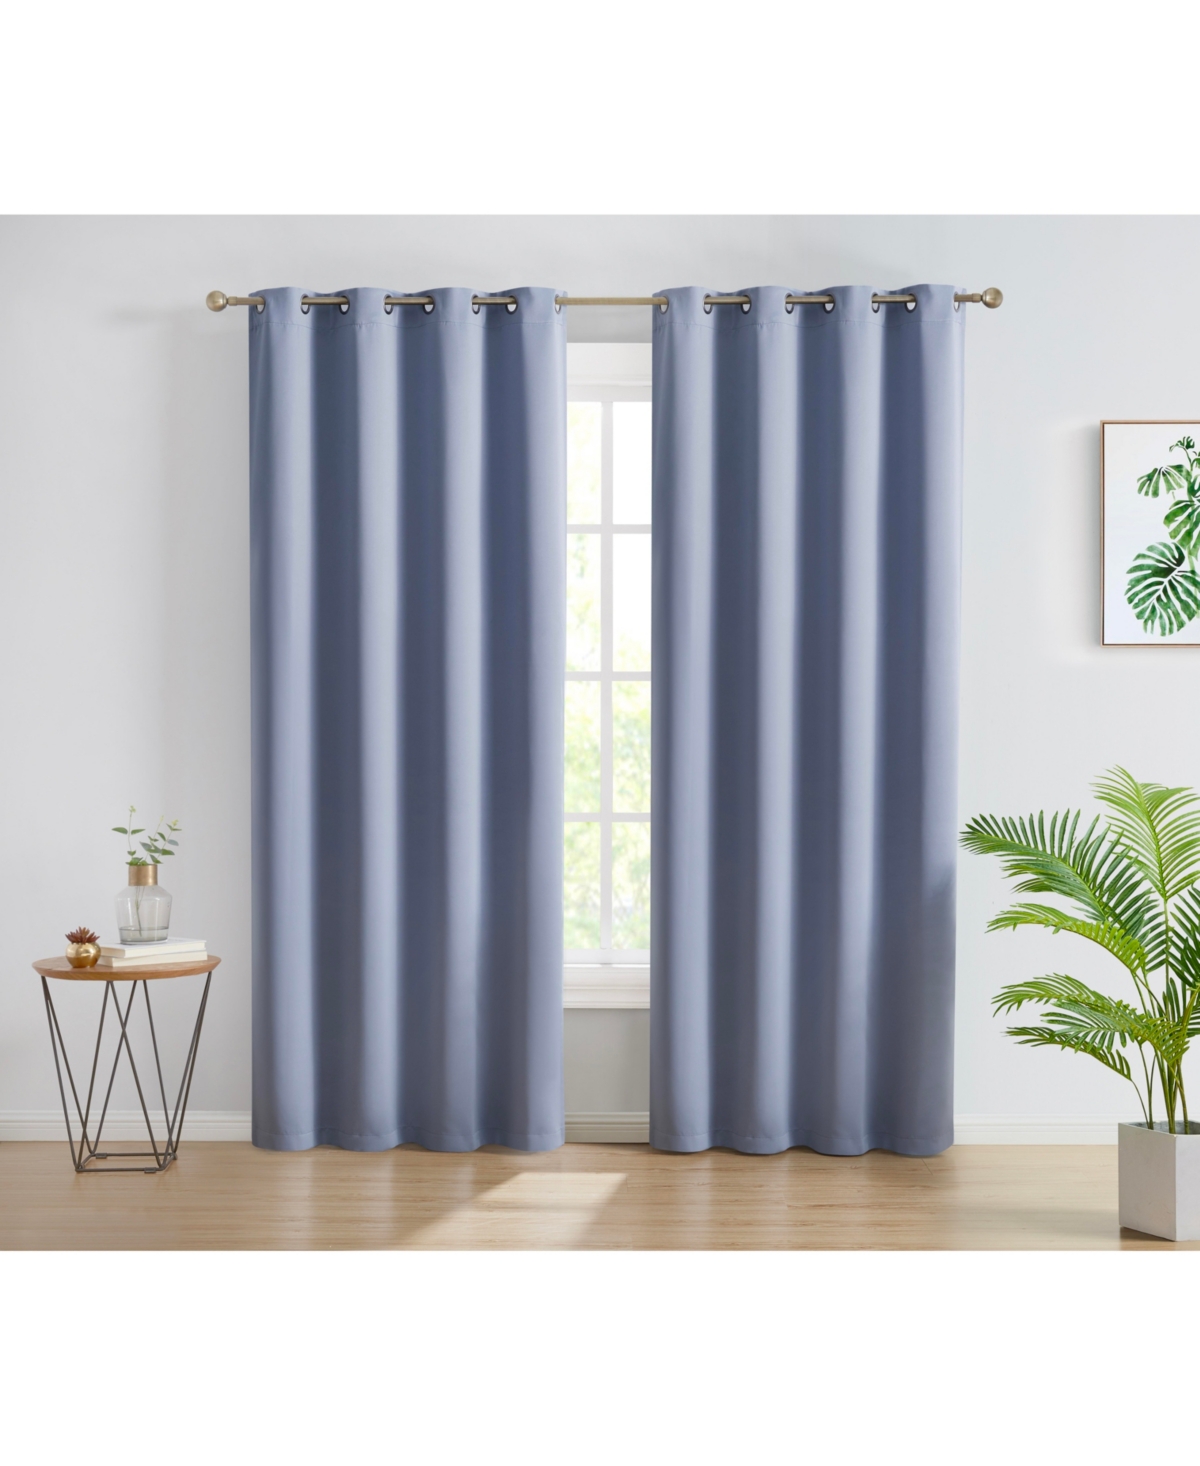 Oxford Blackout Curtains for Bedroom, Noise Reduction Thermal Insulated Window Curtain Grommet Panels, Set of 2 - Dusty blue